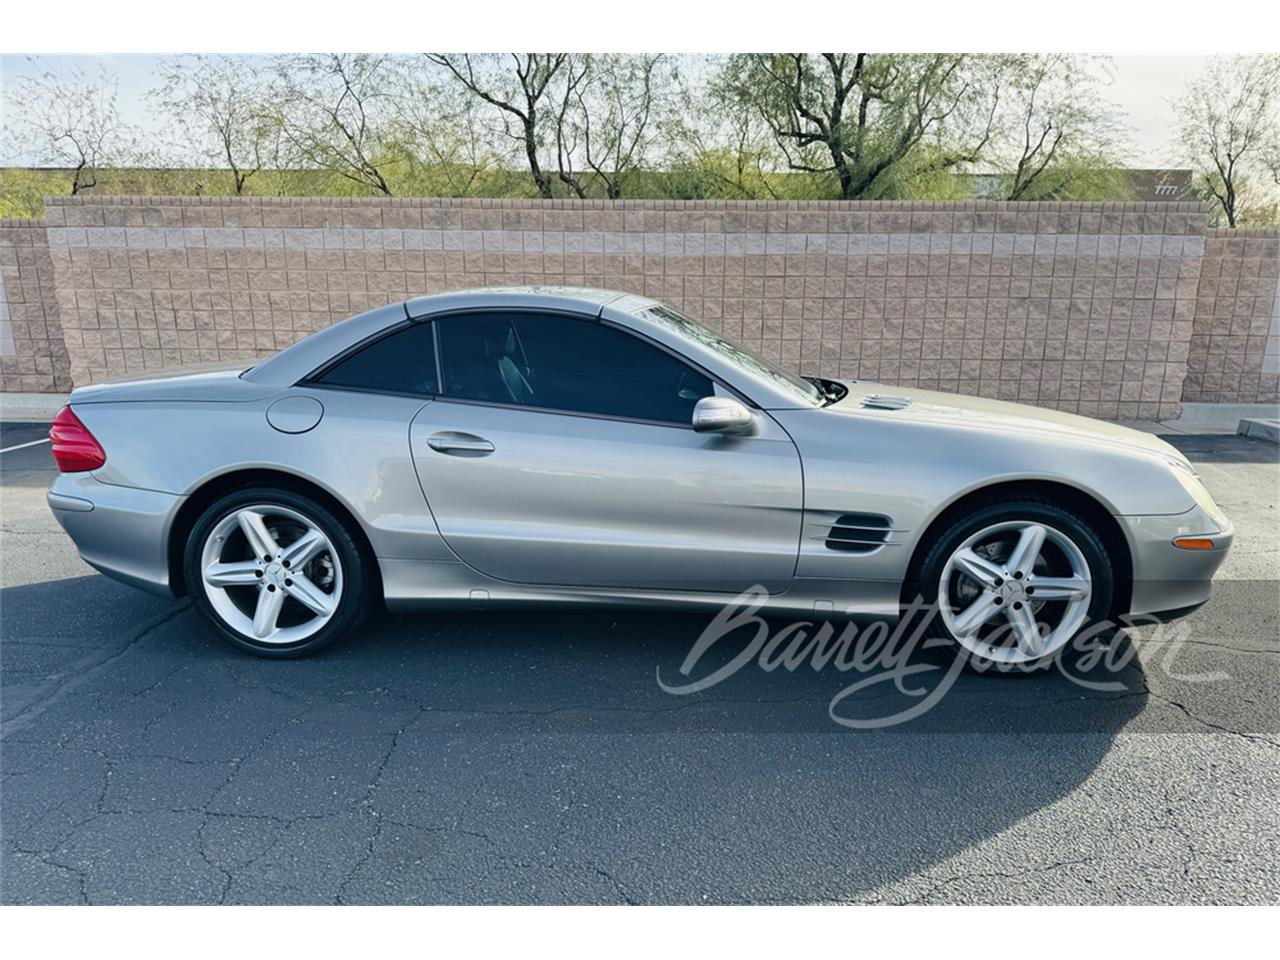 For Sale at Auction: 2004 Mercedes-Benz SL500 in Scottsdale, Arizona for sale in Scottsdale, AZ